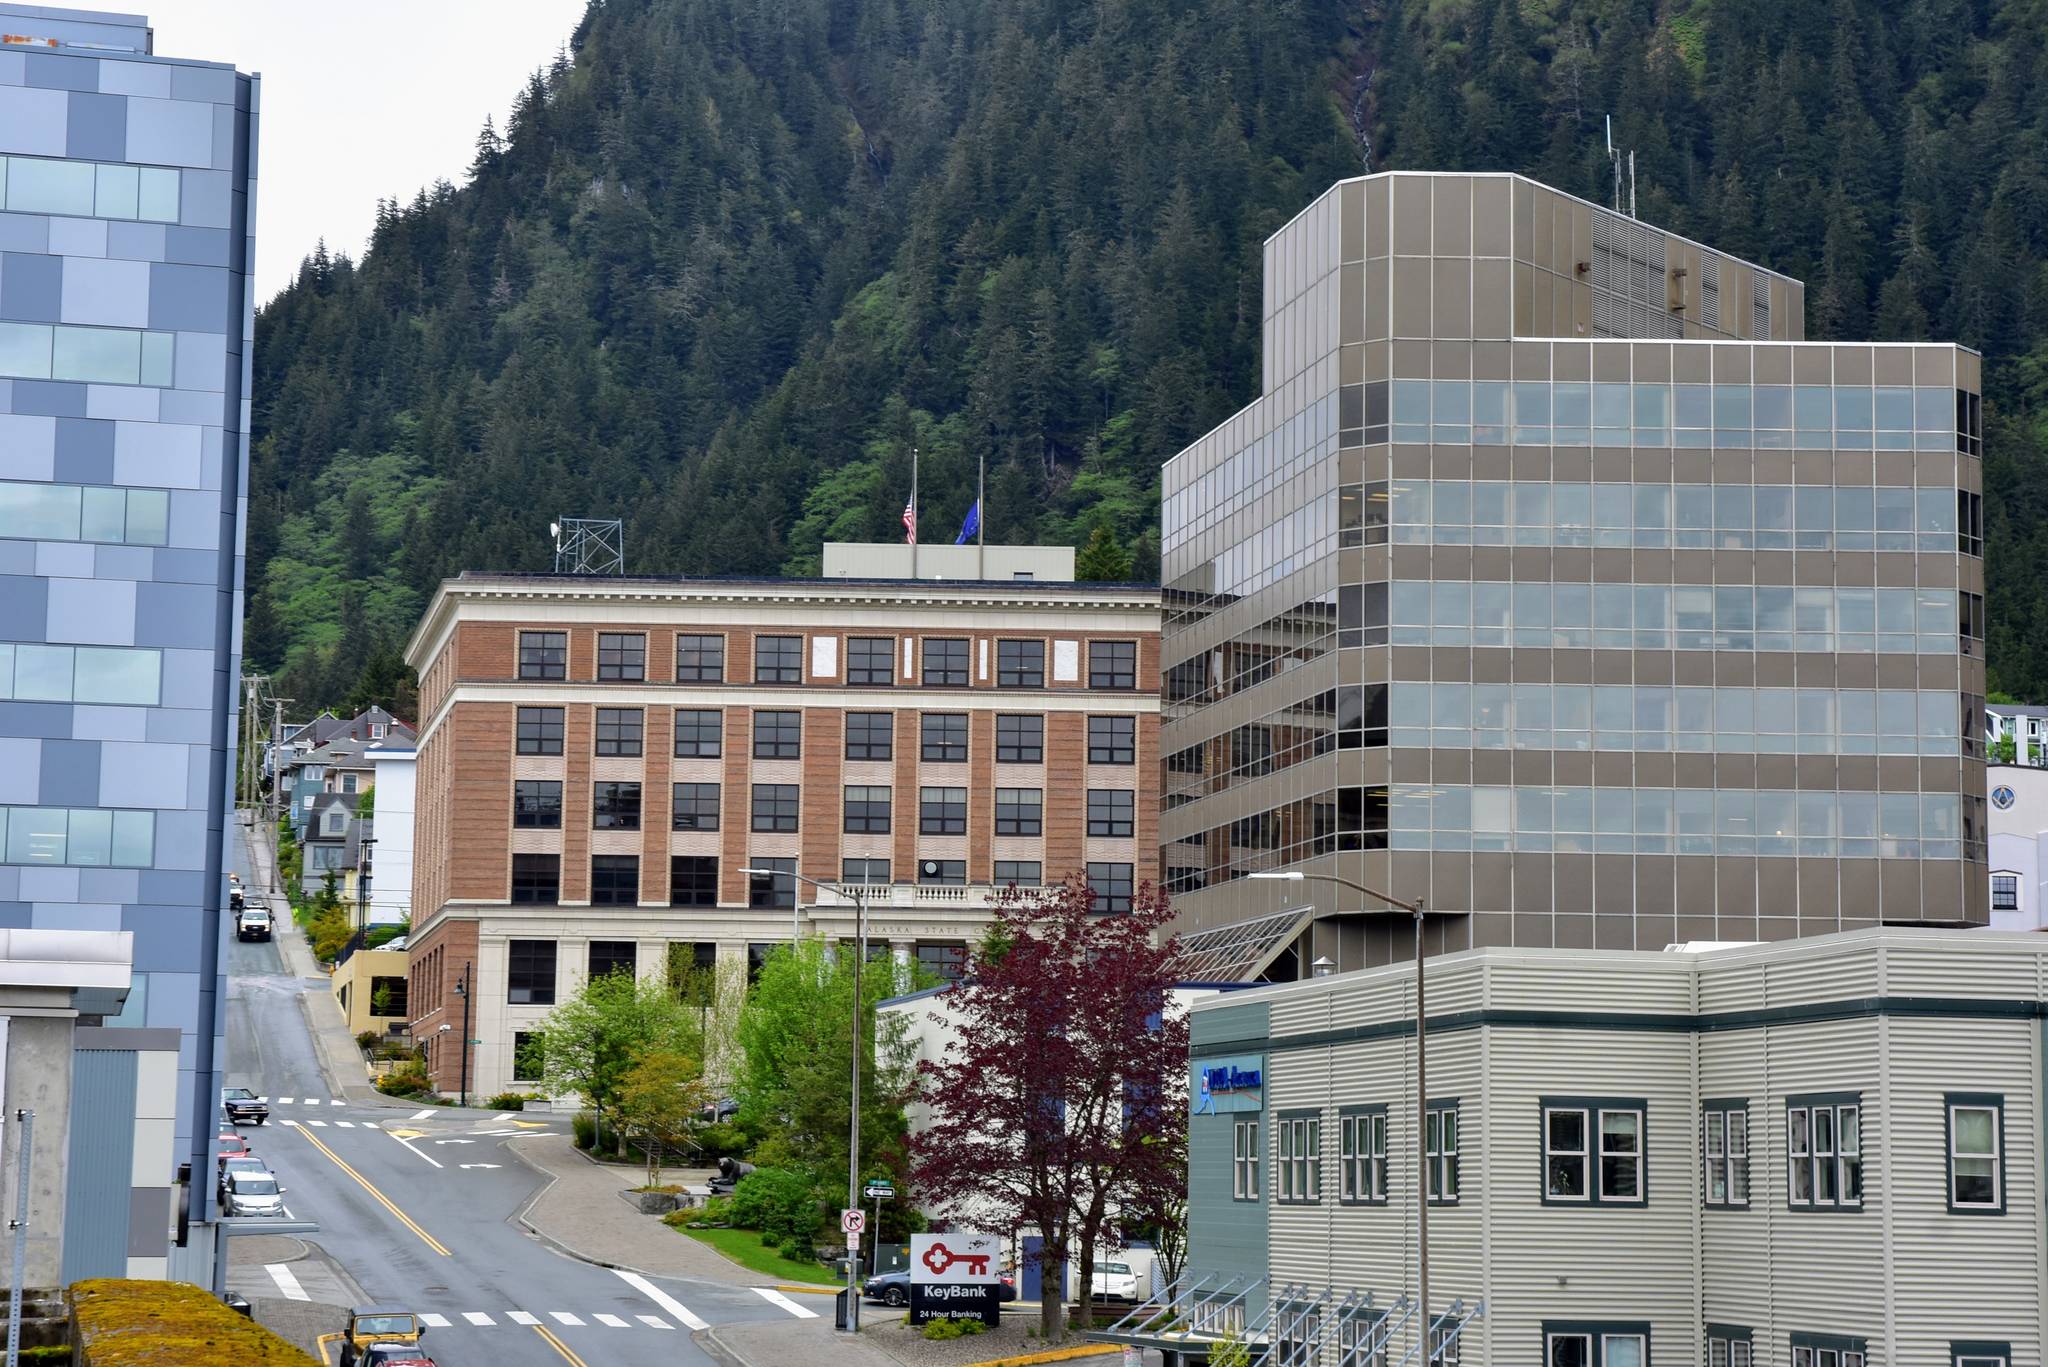 The Alaska State Capitol was quiet on Friday, May 28, 2021, as several lawmakers returned to their home districts for the Memorial Day weekend. Negotiations on the state's budget won't begin again until Tuesday, June 1. (Peter Segall / Juneau Empire)